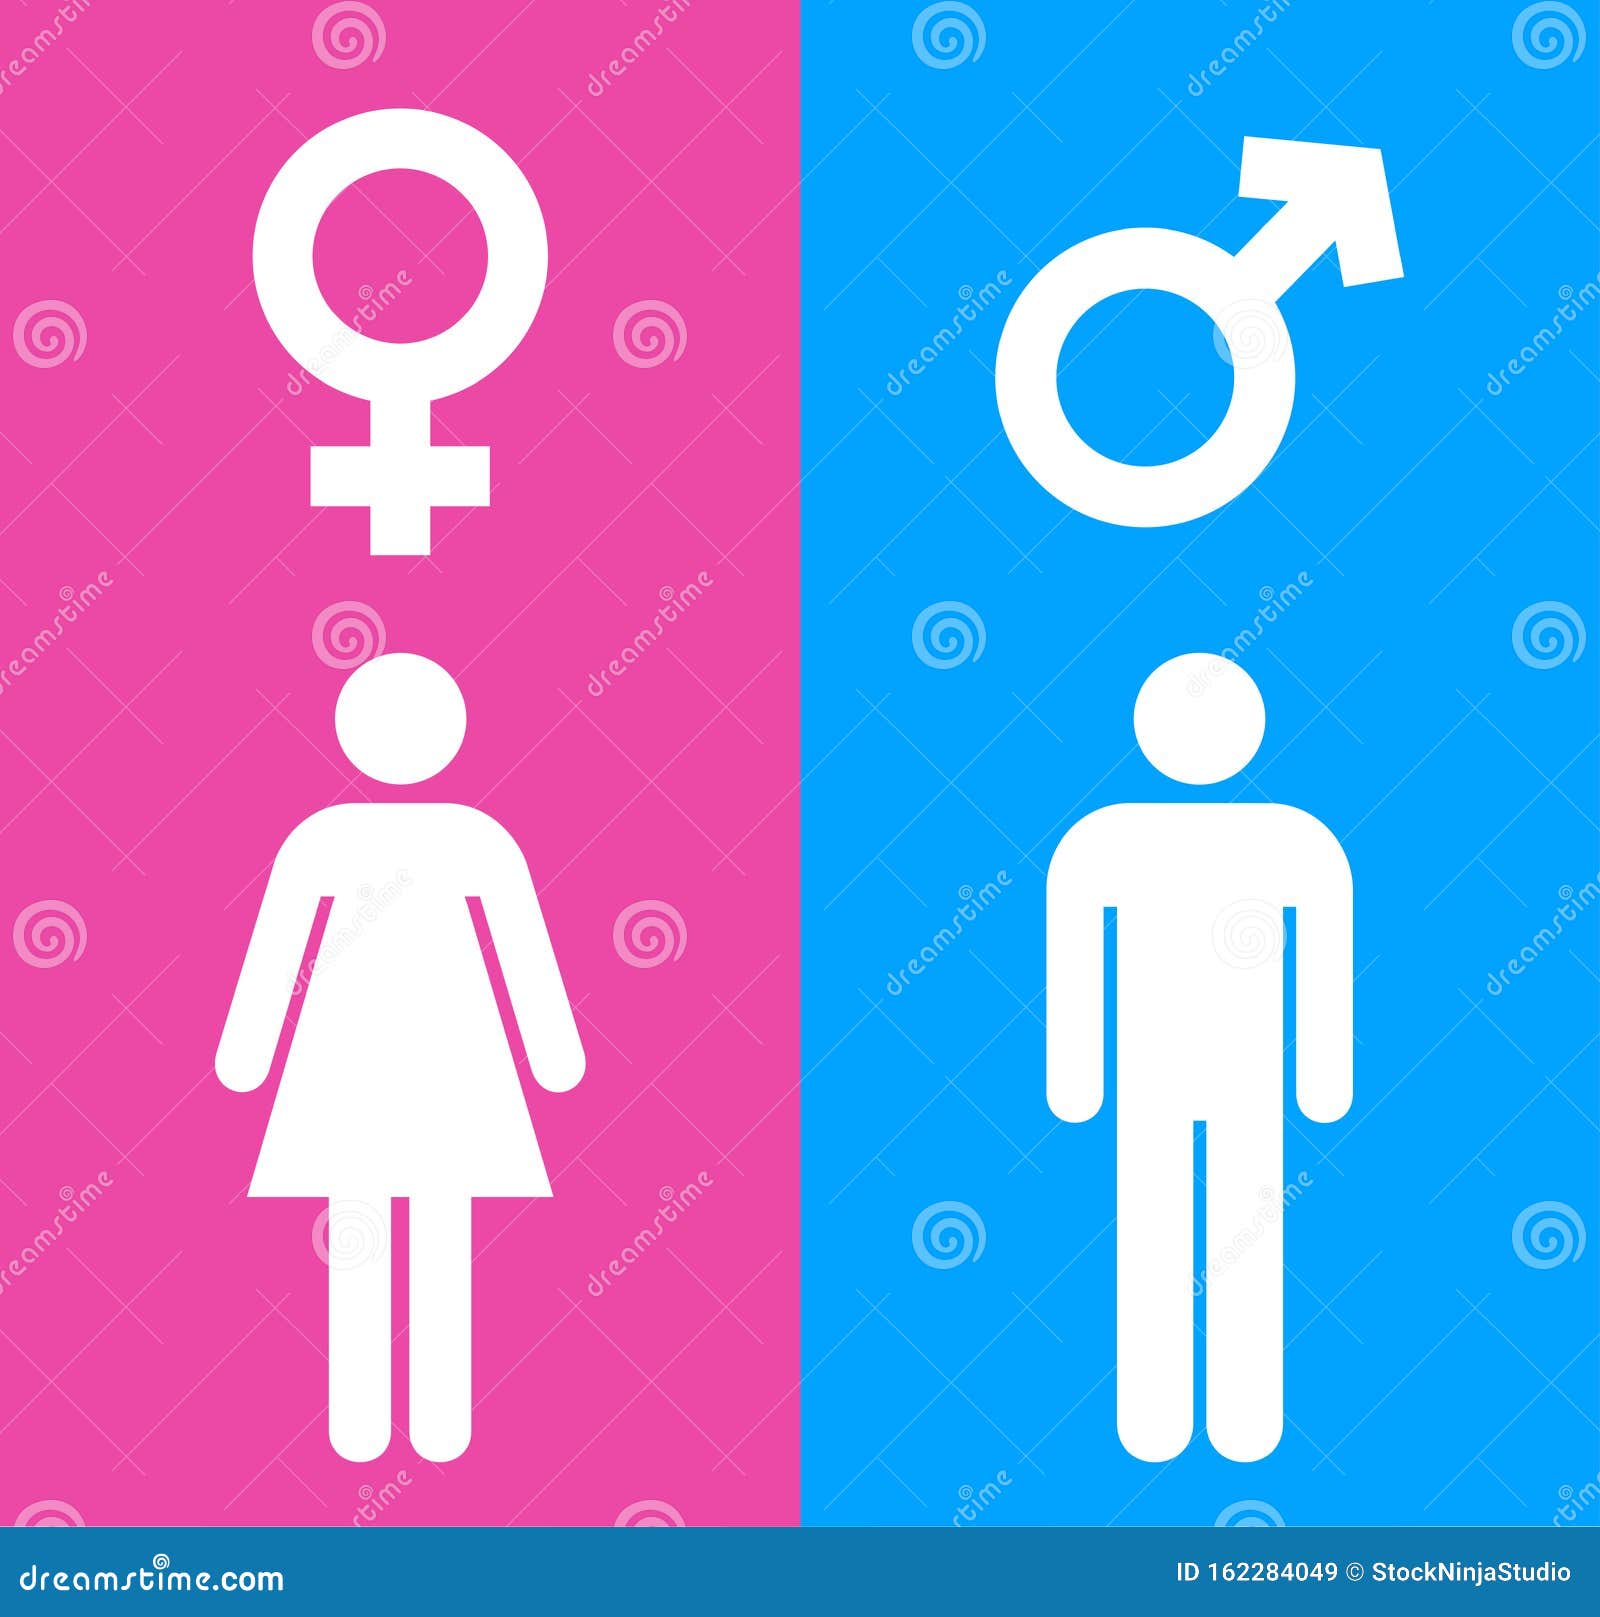 Male And Female Icons With Blue And Pink Background Gender Symbol